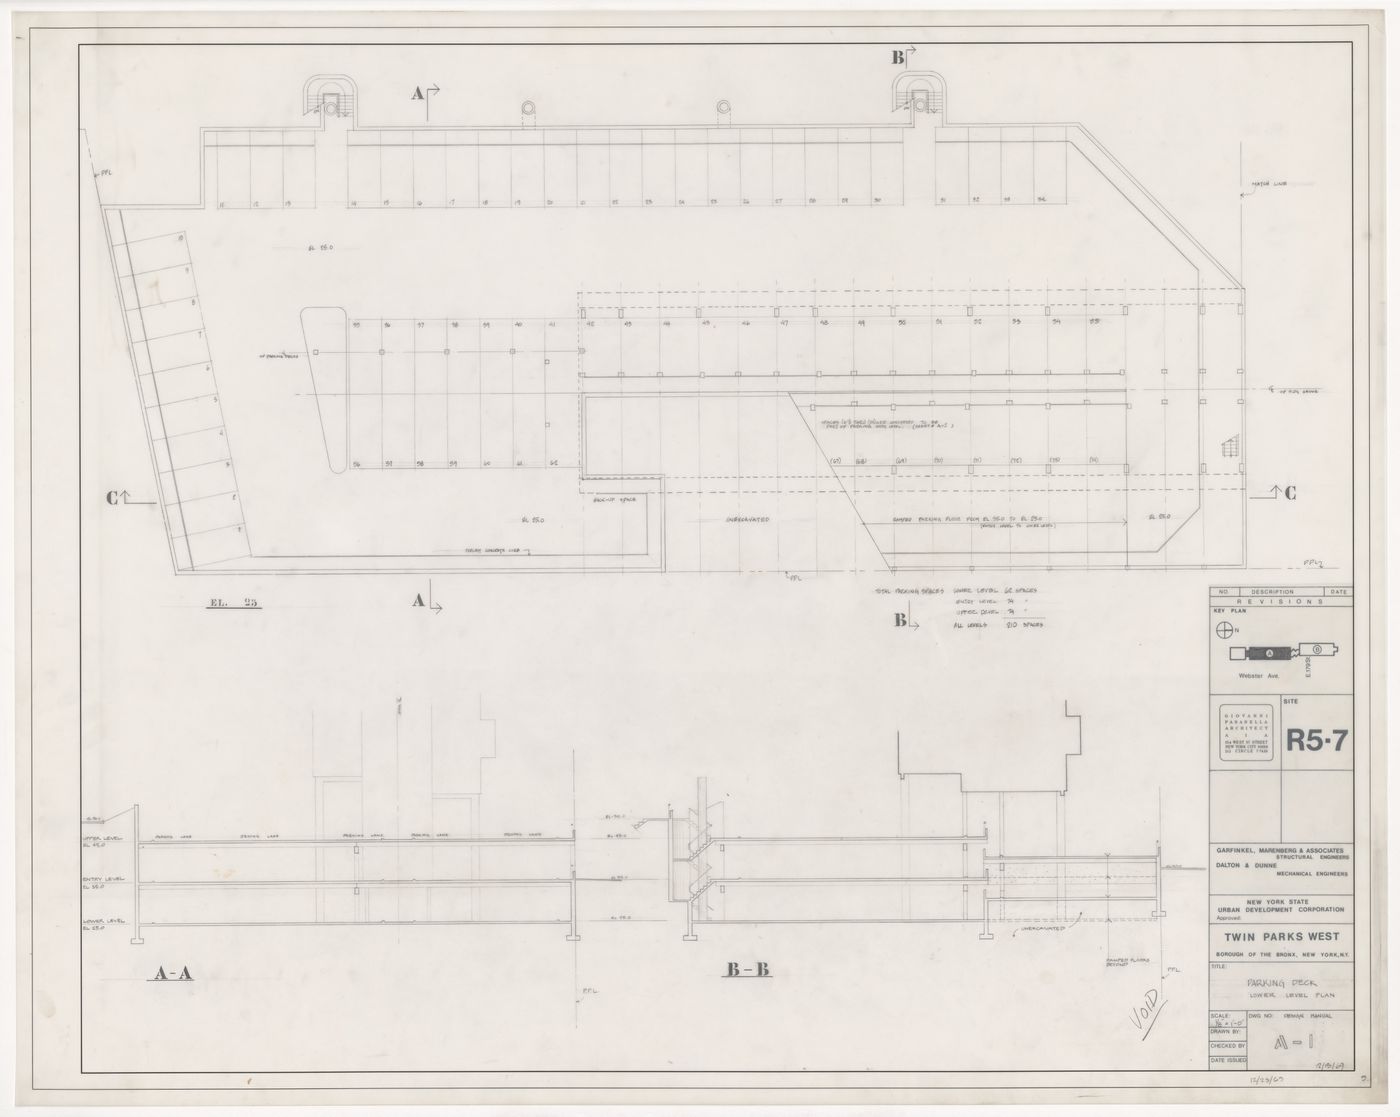 Parking deck plan and sections for Twin Parks West, Site R5-7, Bronx, New York